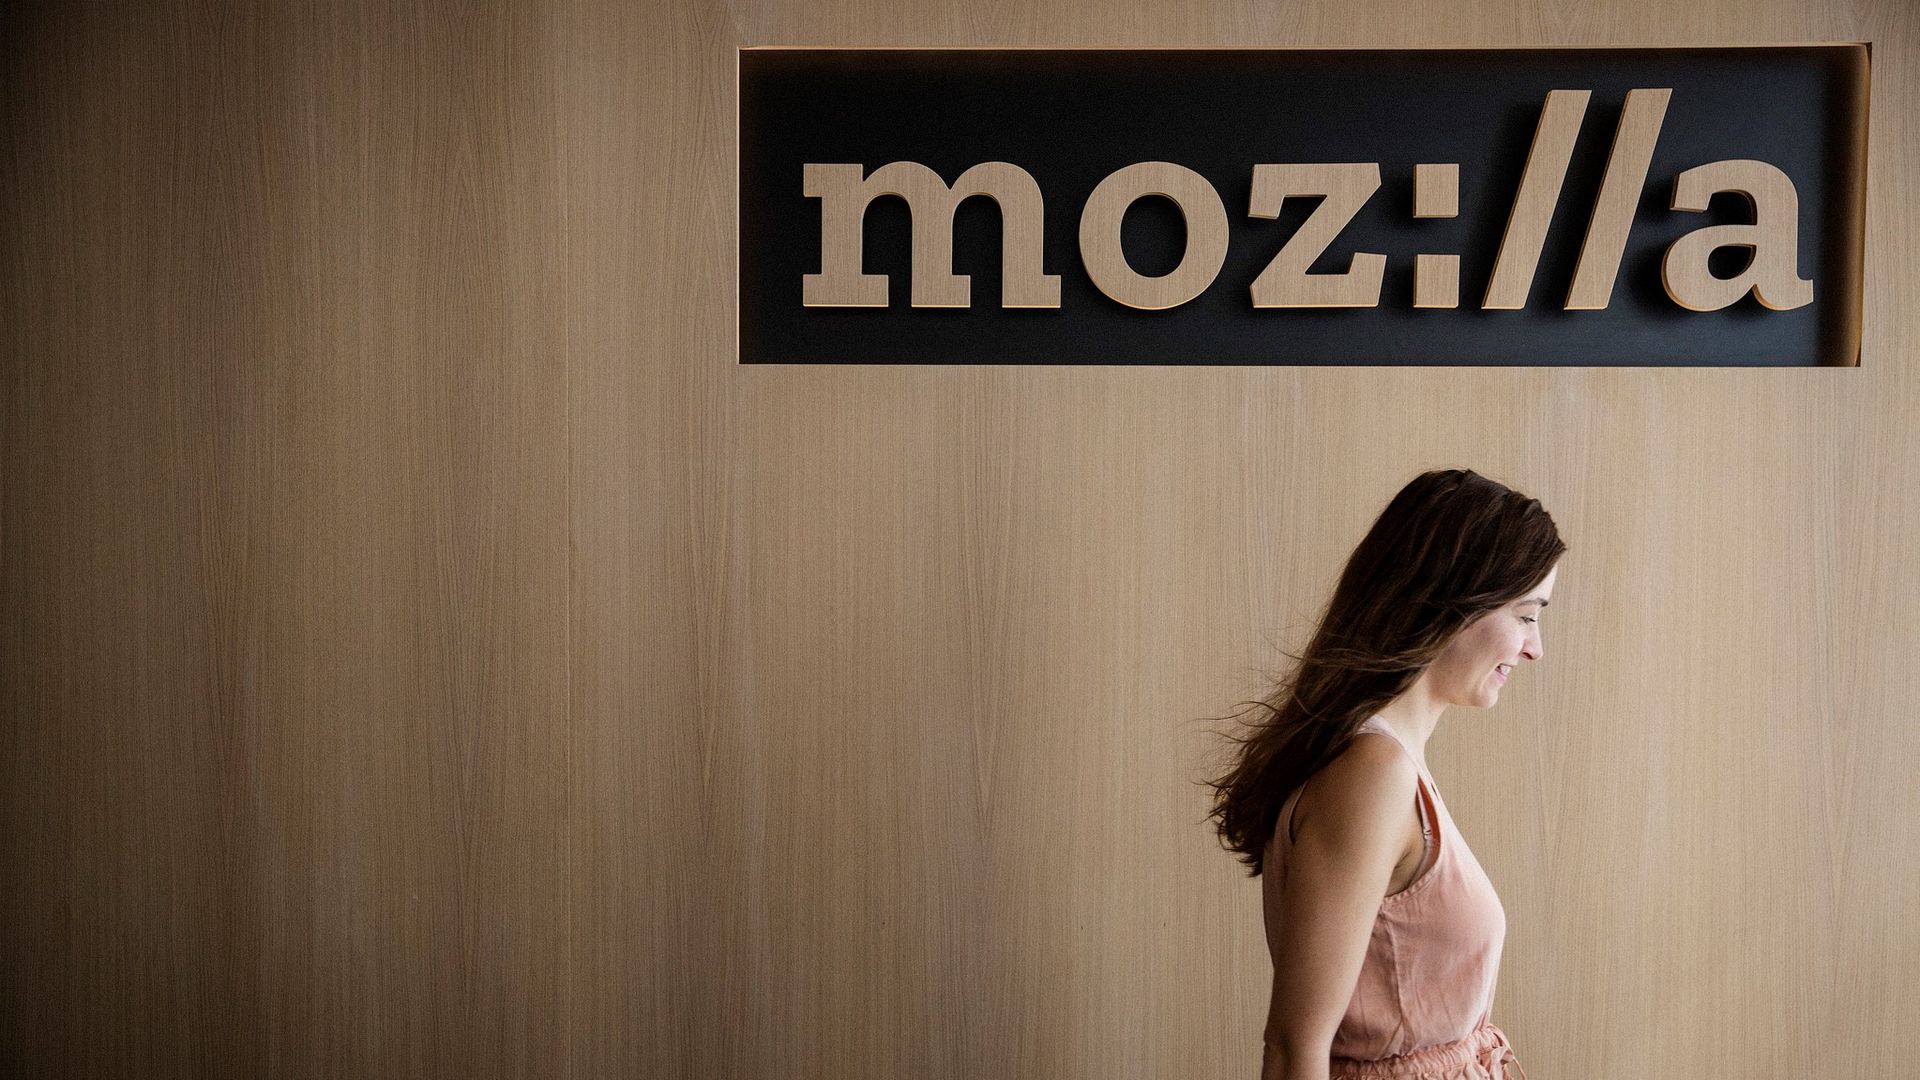 mozilla scaling back vpn, relay and more as it downsizes, lays off 60 workers